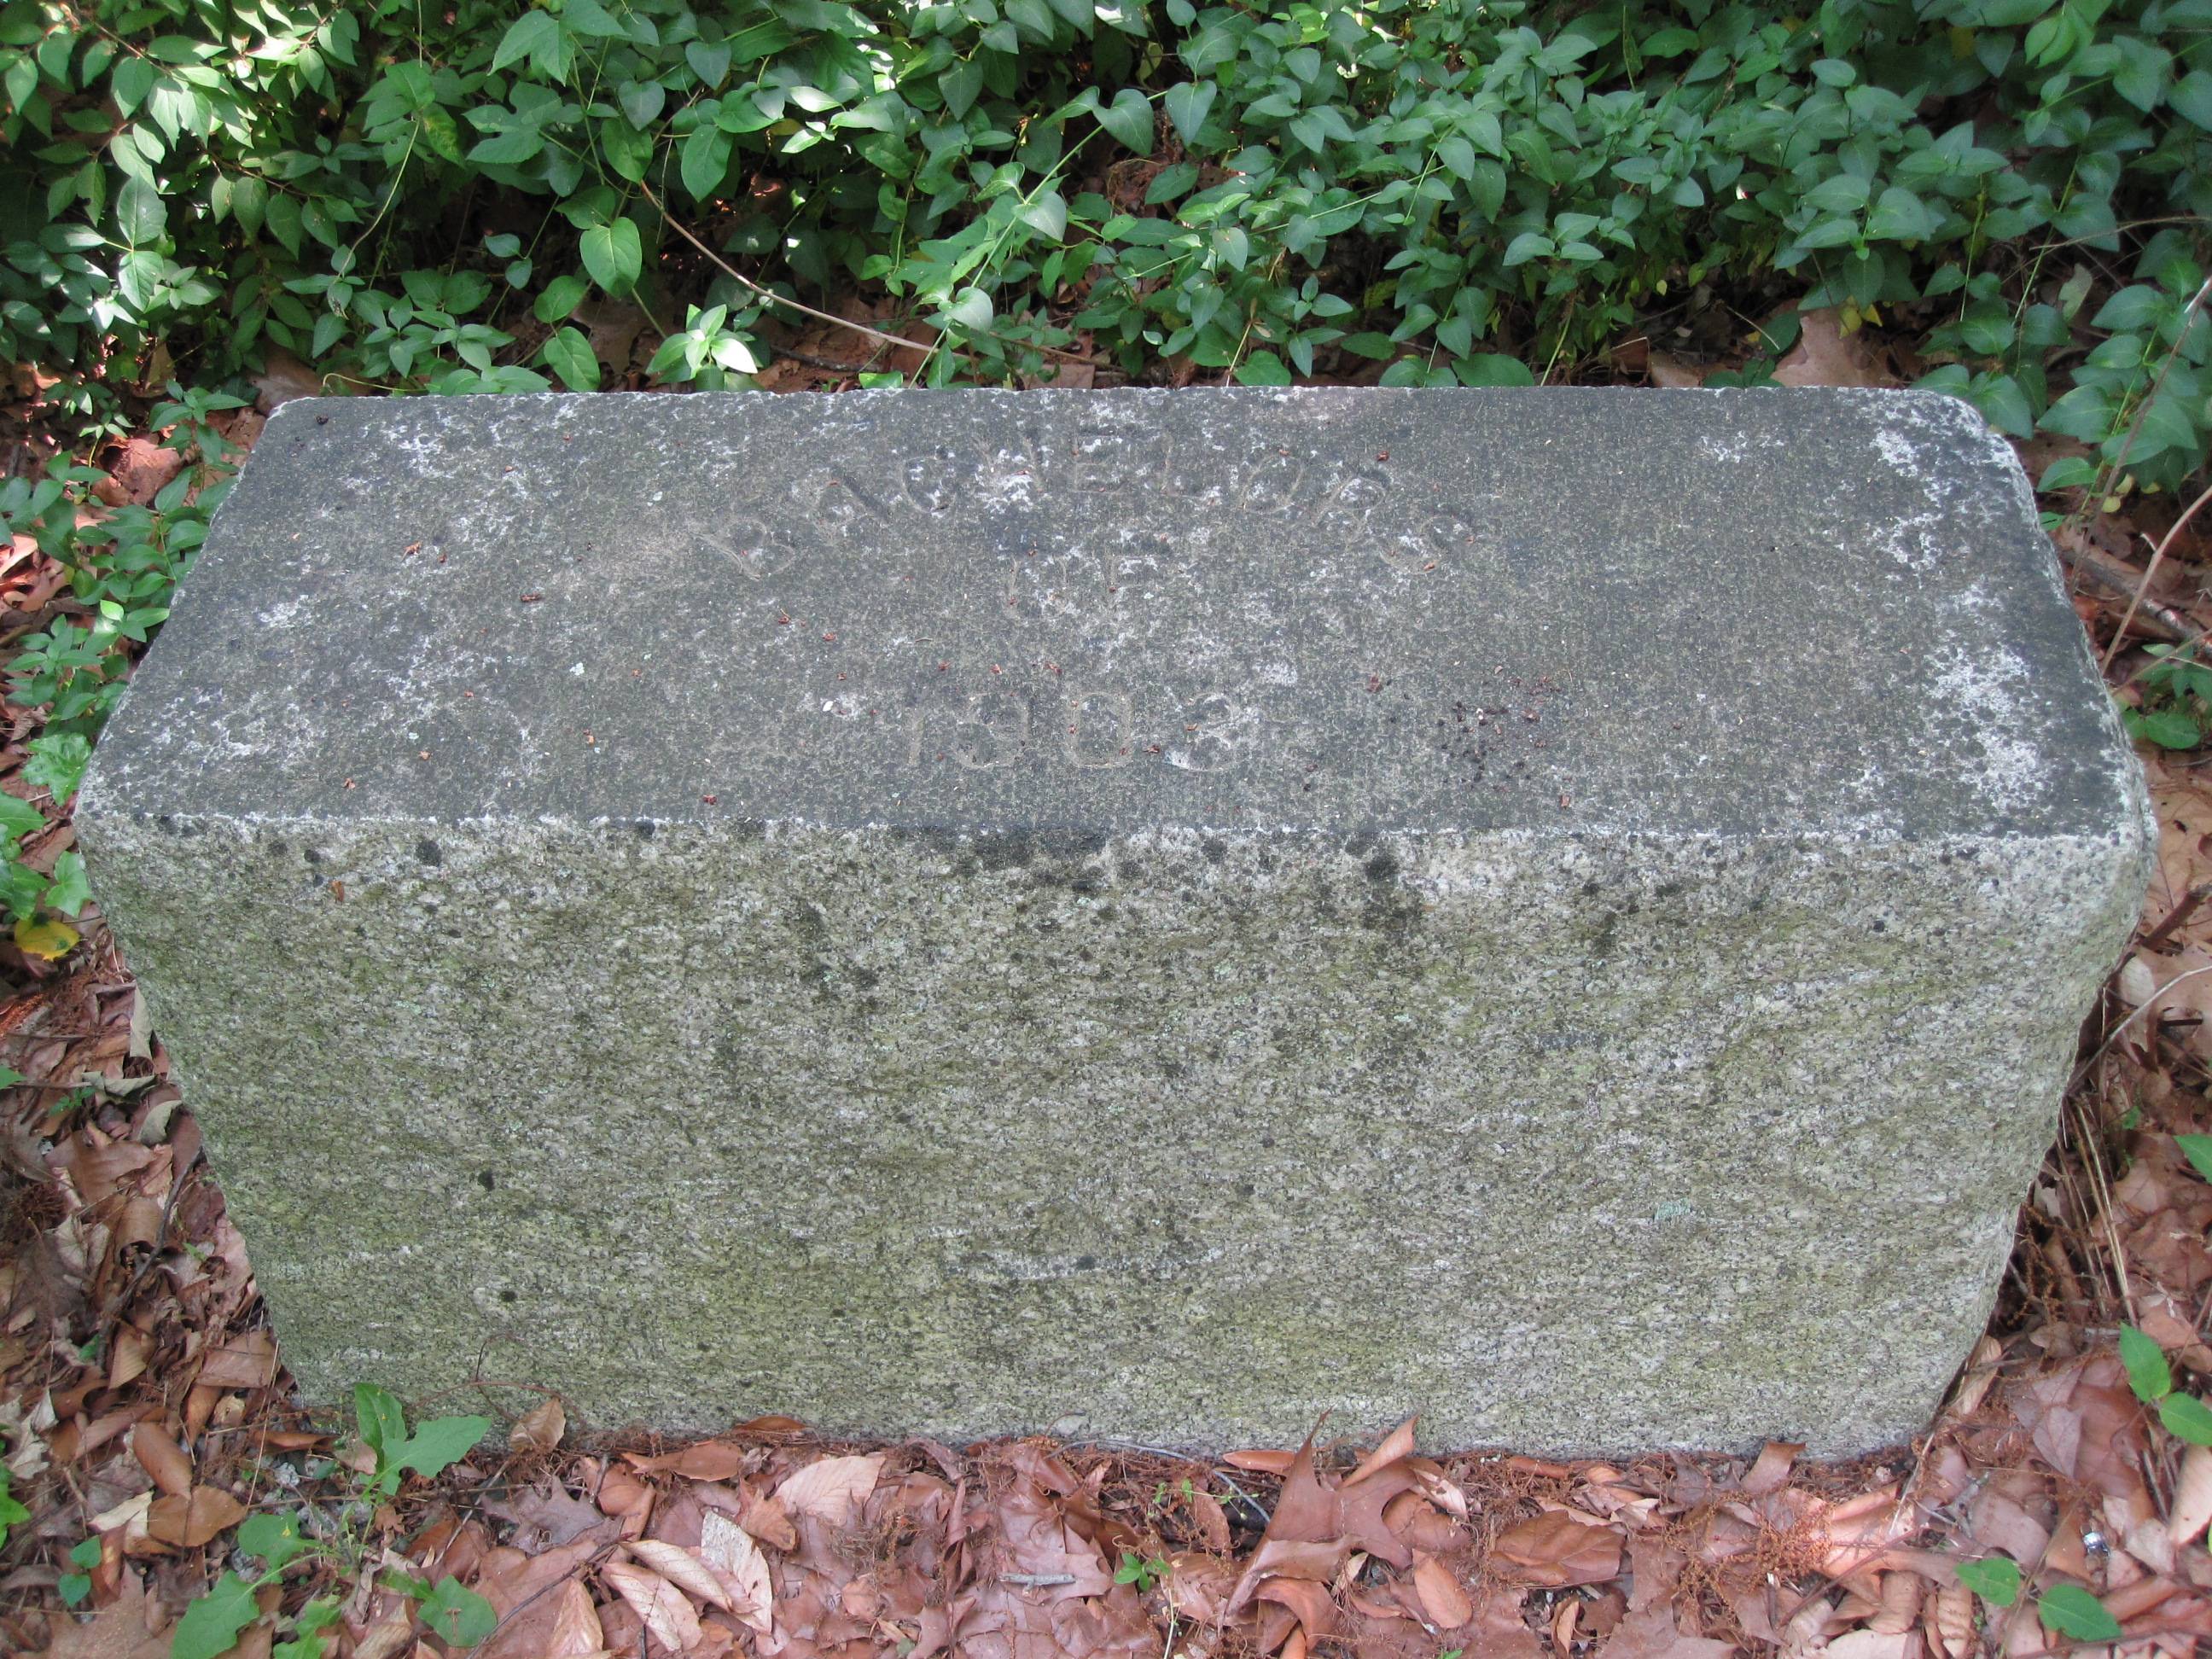 A 1903 stone marker in Peabody Park honors the first class of bachelor students.